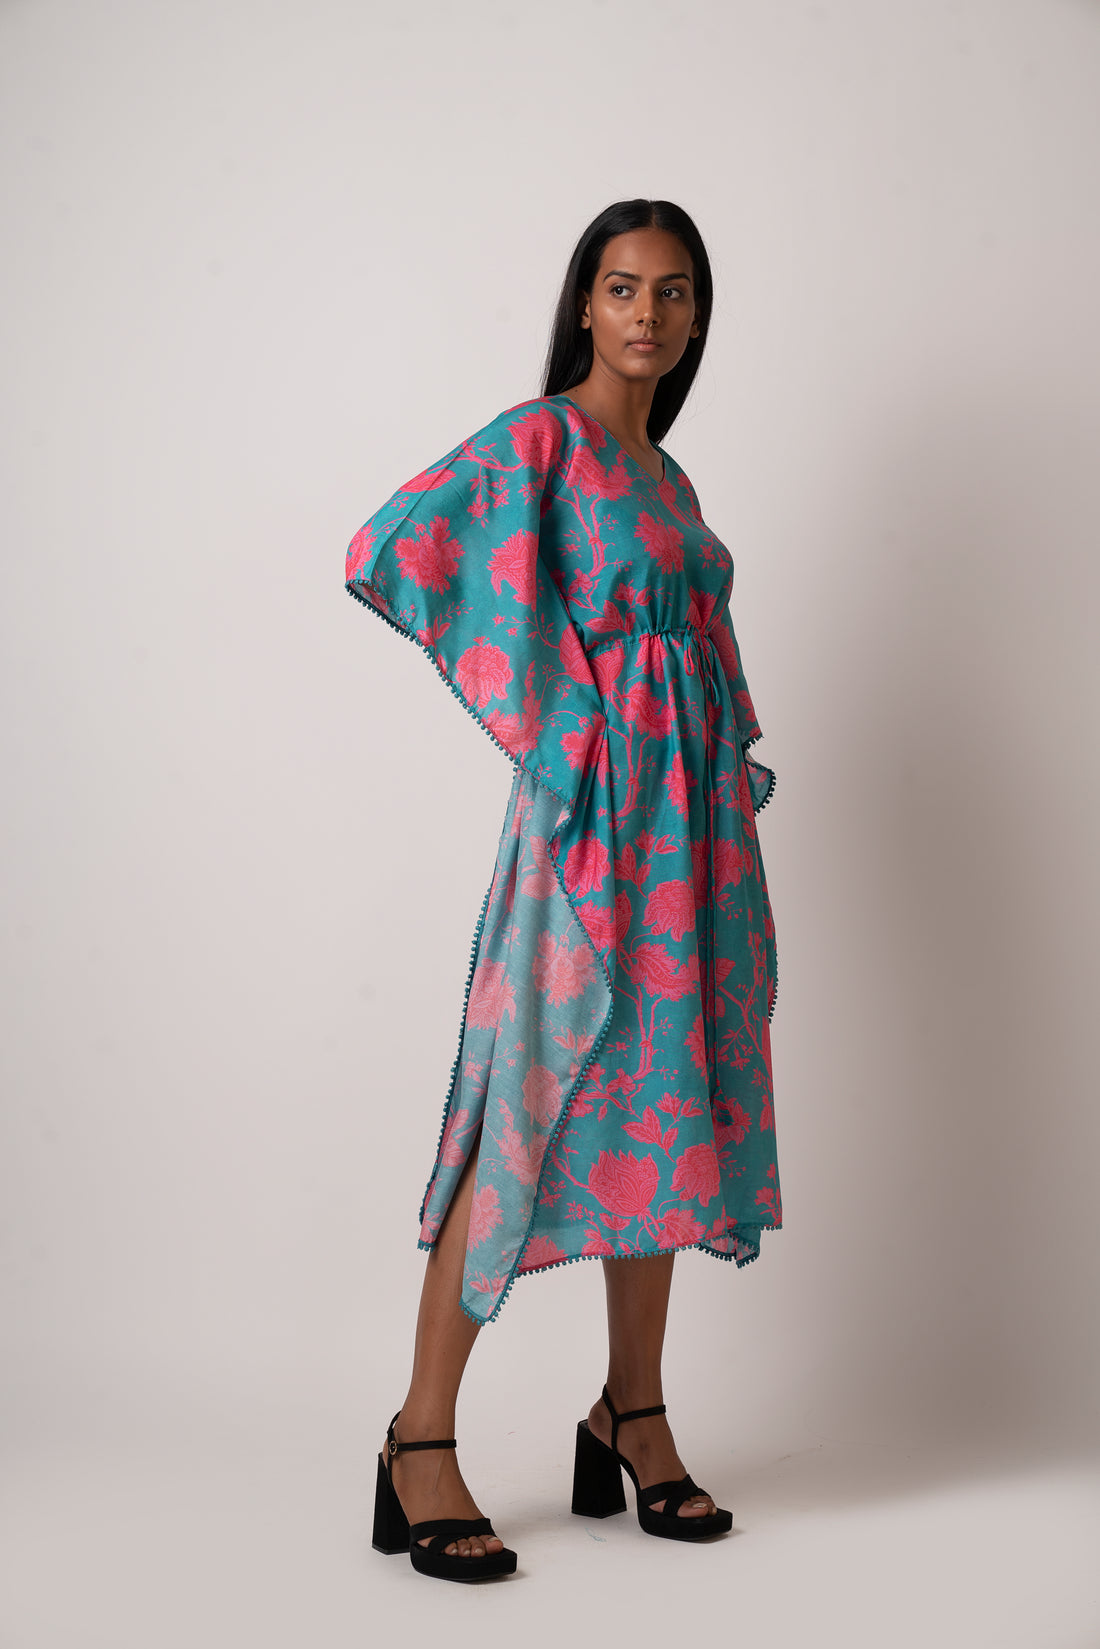 From Beach to Party: Kaftan Dresses for Every Occasion